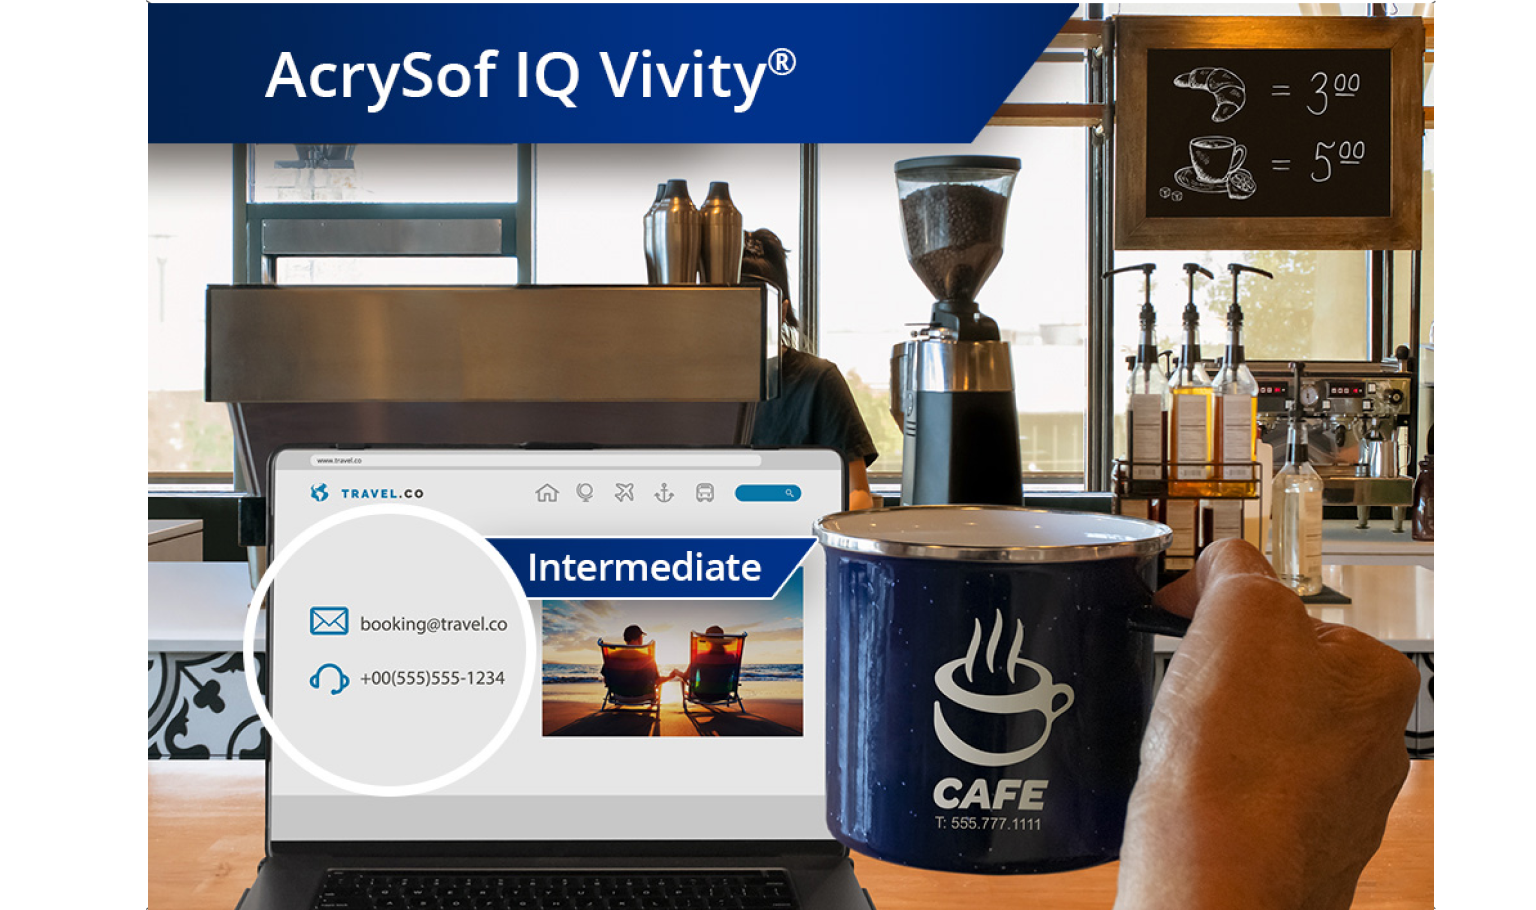 Clear image of a coffee shop with a view from the counter of coffee machines and other ingredients. A laptop is open on the countertop and an individual’s hand holds up a coffee mug to the right of the laptop screen. White text at the top left corner of this image reads “AcrySof IQ Vivity.”